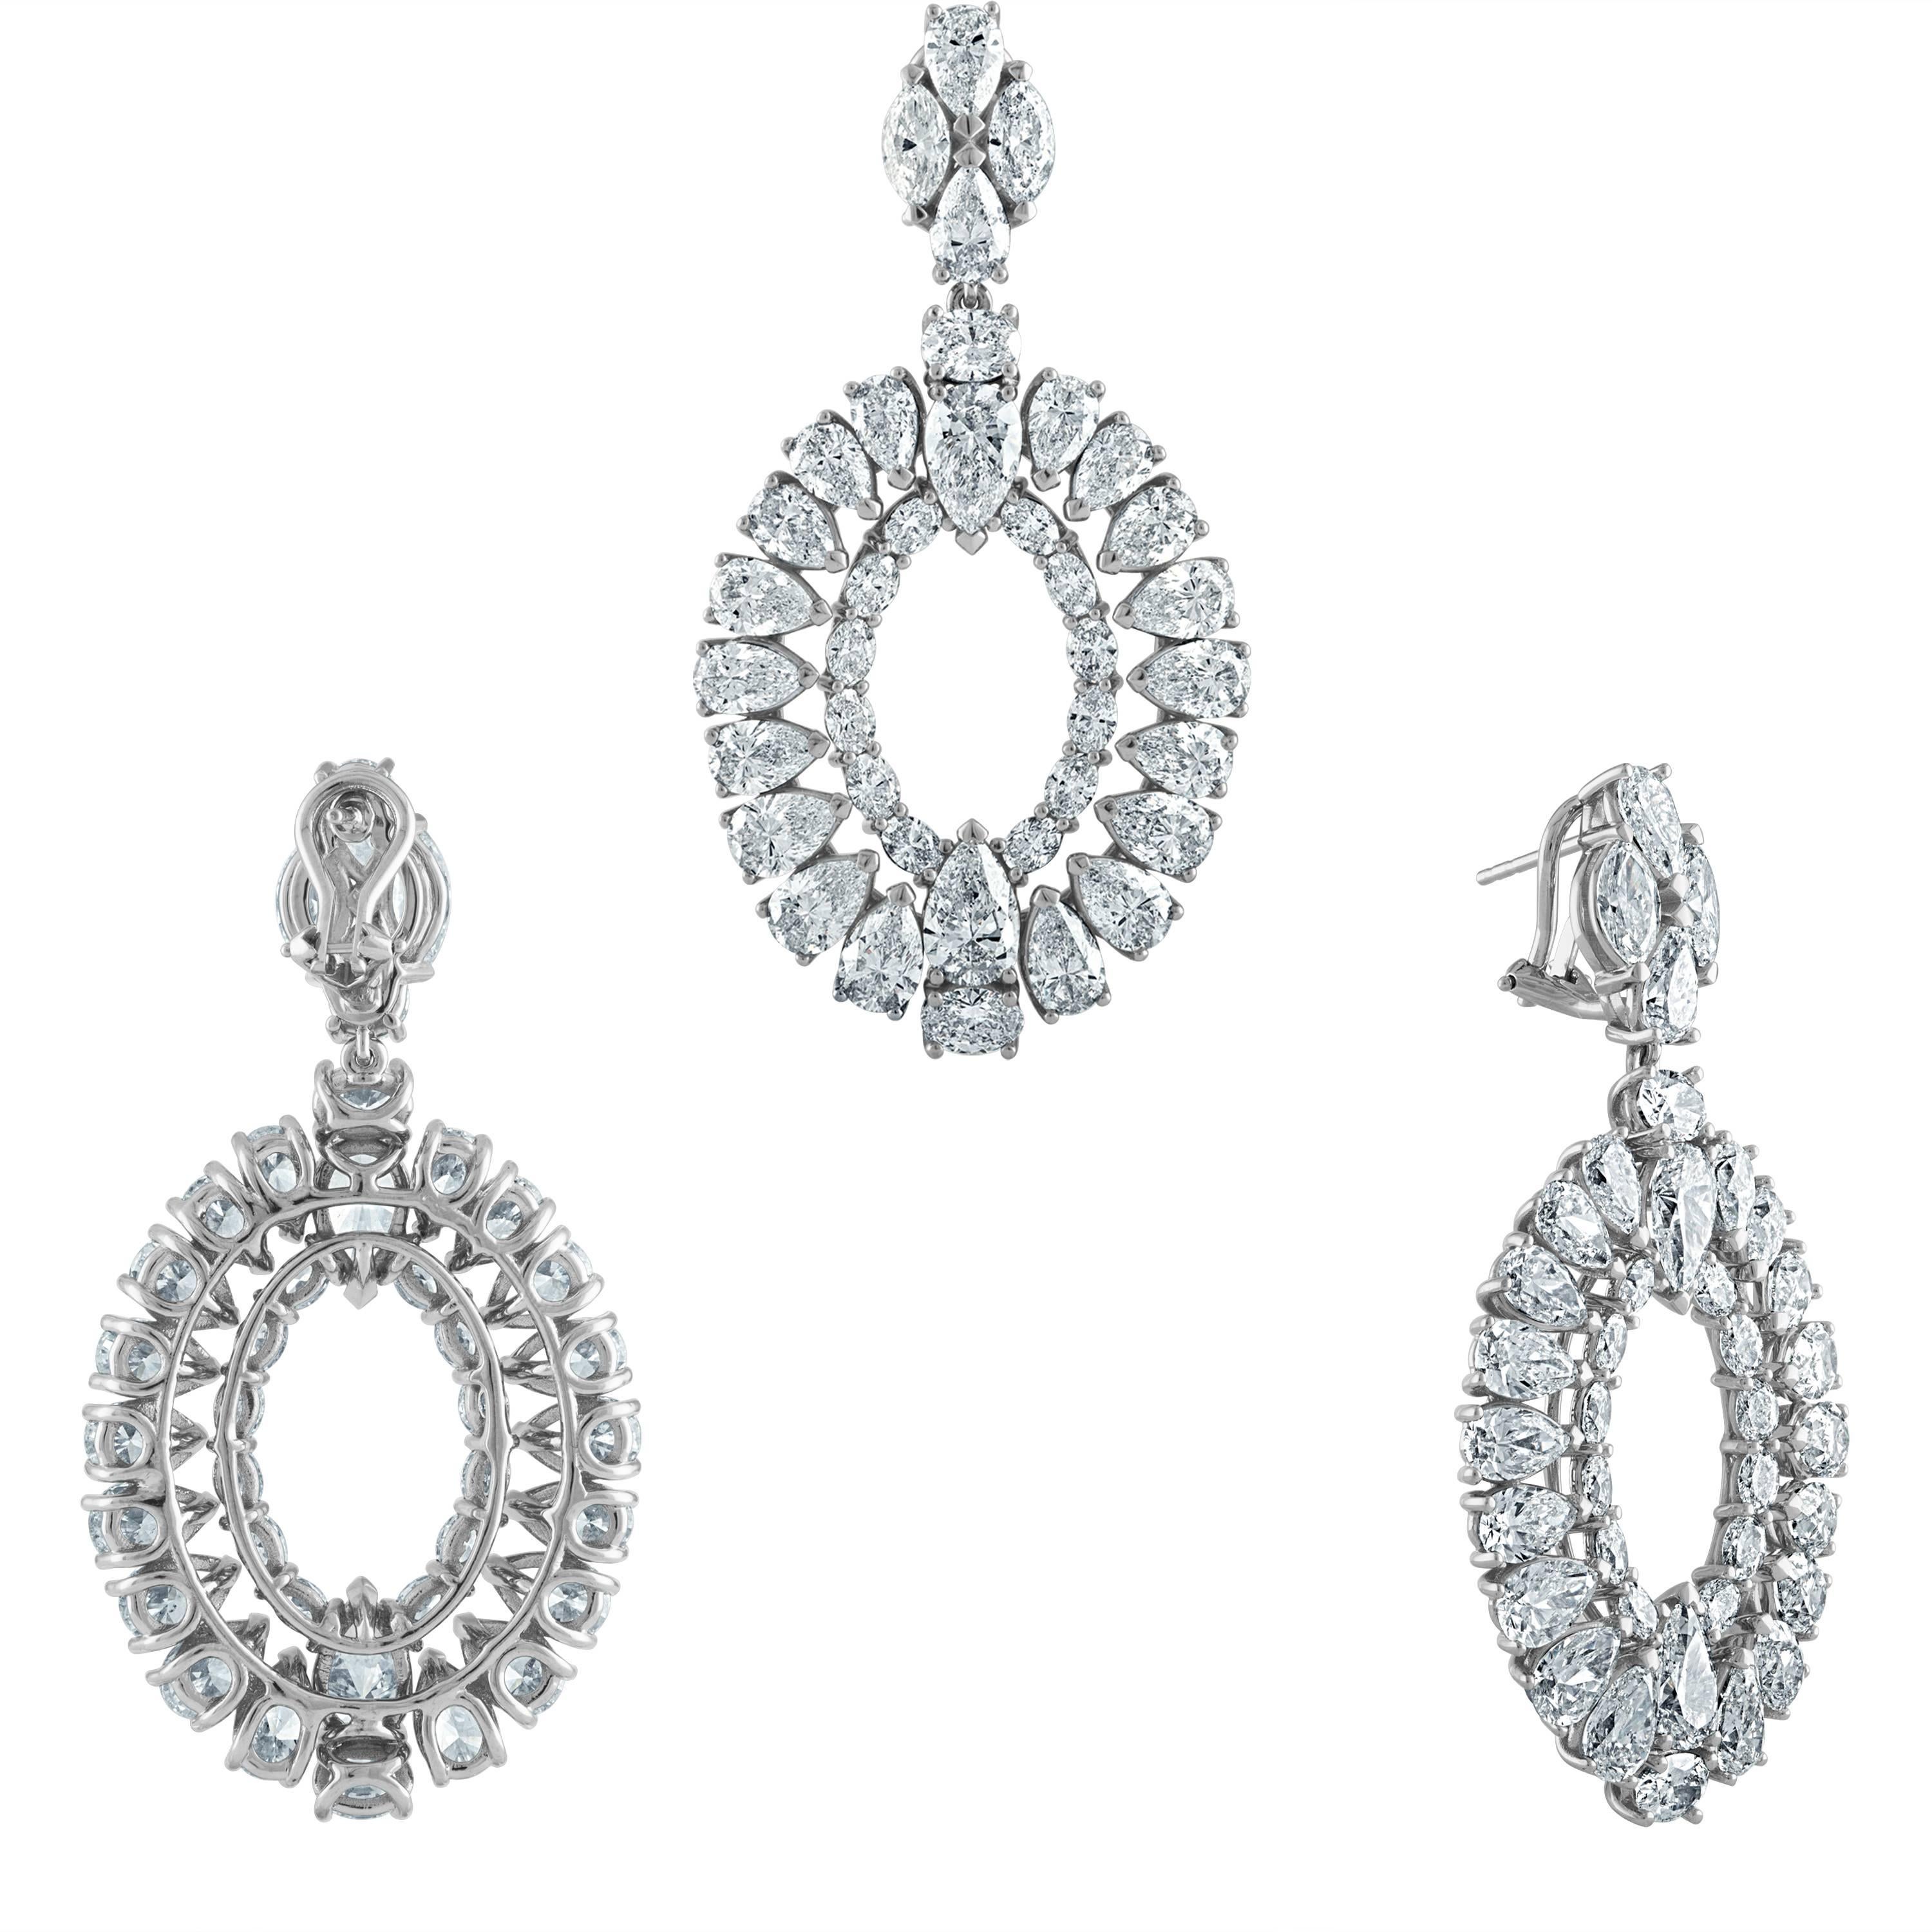 Platinum Earrings with 31.27 Carat of Fancy Shapes Diamonds 2